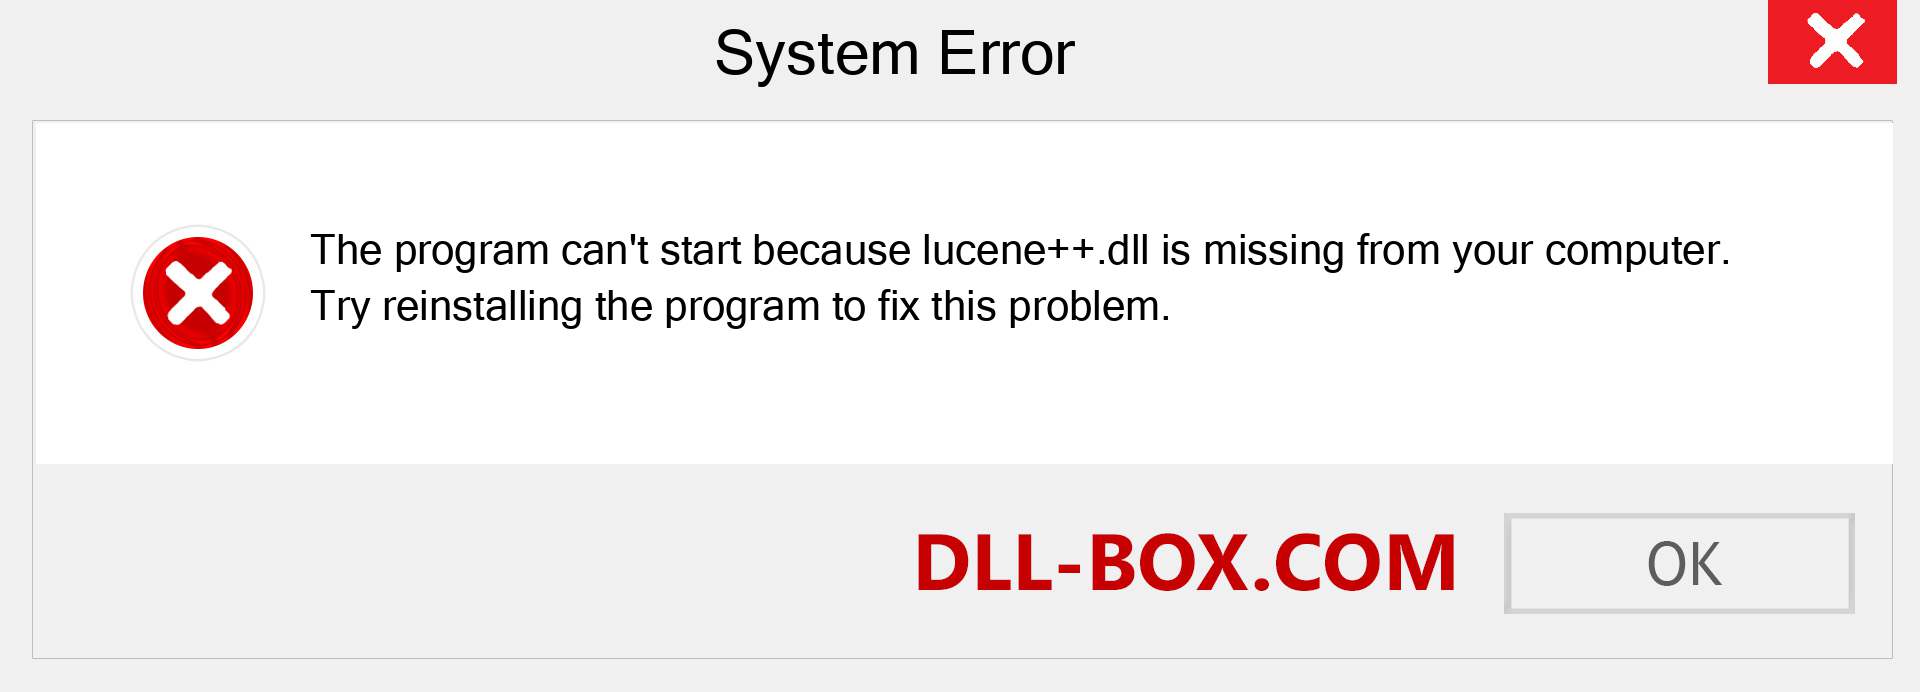  lucene++.dll file is missing?. Download for Windows 7, 8, 10 - Fix  lucene++ dll Missing Error on Windows, photos, images